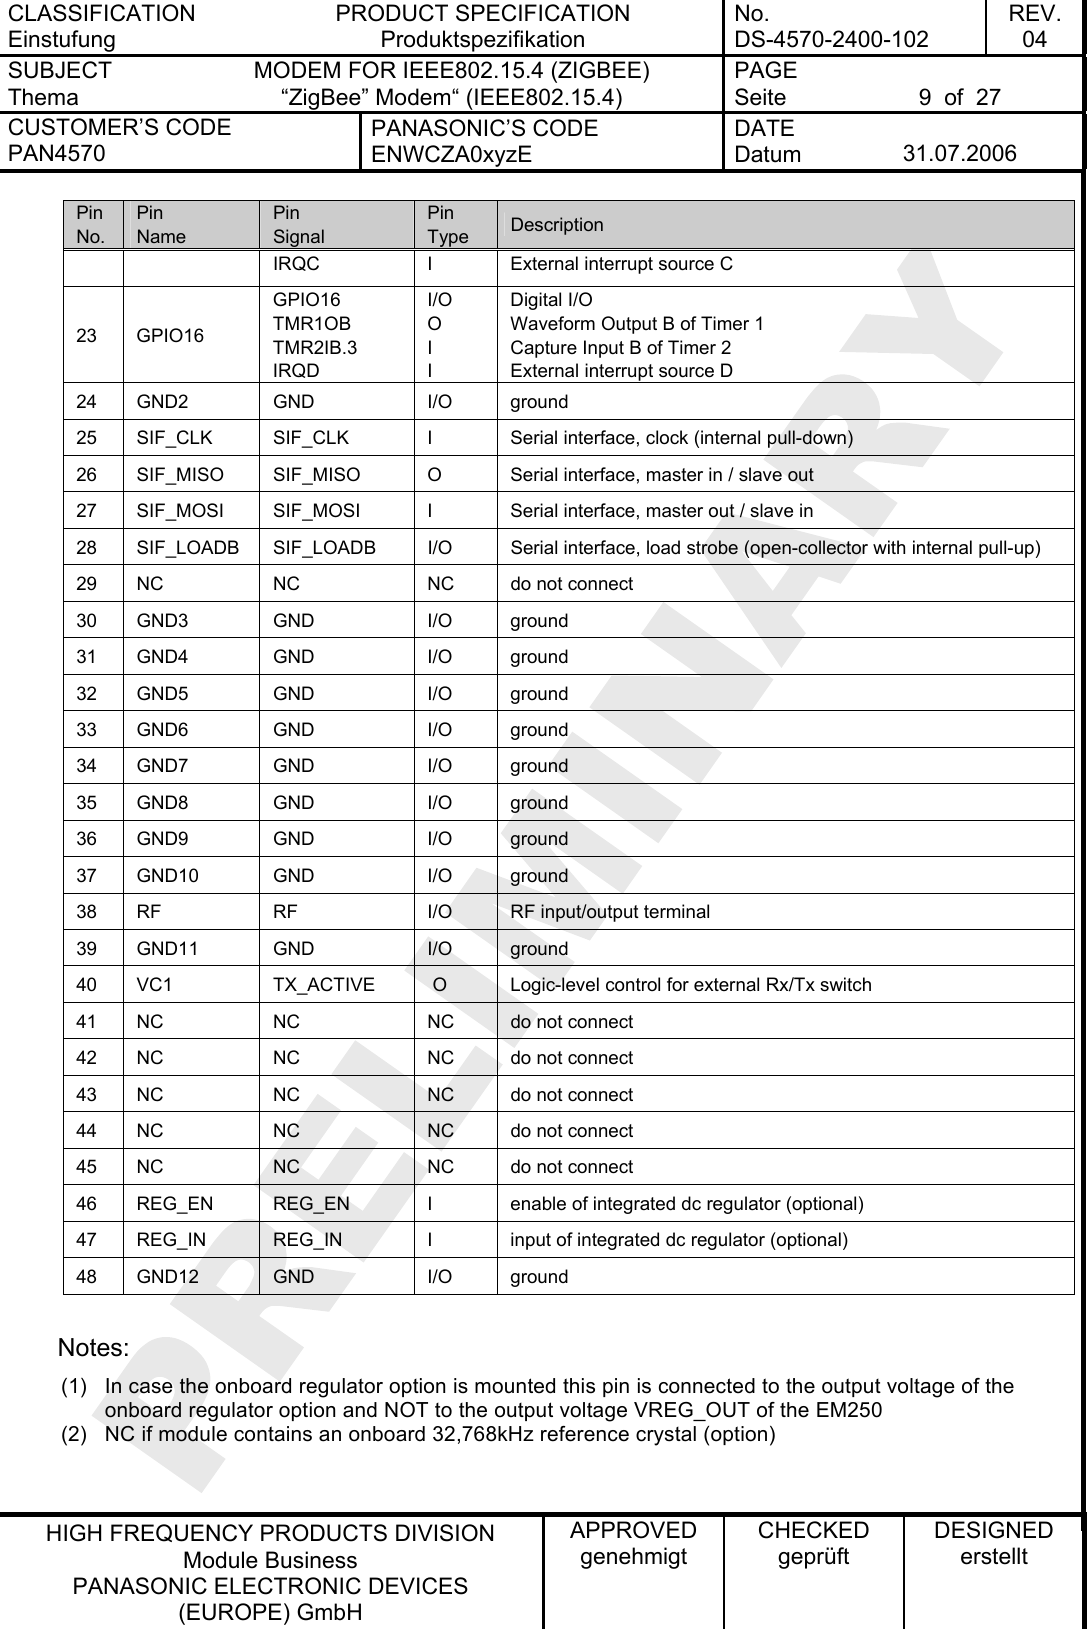 CLASSIFICATION Einstufung PRODUCT SPECIFICATION Produktspezifikation No. DS-4570-2400-102 REV. 04 SUBJECT Thema MODEM FOR IEEE802.15.4 (ZIGBEE) “ZigBee” Modem“ (IEEE802.15.4)   PAGE Seite  9  of  27 CUSTOMER’S CODE PAN4570 PANASONIC’S CODE ENWCZA0xyzE DATE Datum  31.07.2006   HIGH FREQUENCY PRODUCTS DIVISION Module Business PANASONIC ELECTRONIC DEVICES  (EUROPE) GmbH APPROVED genehmigt CHECKED geprüft DESIGNED erstellt Pin No. Pin Name Pin Signal Pin Type  Description IRQC  I  External interrupt source C 23  GPIO16  GPIO16 TMR1OB TMR2IB.3 IRQD I/O O I I Digital I/O Waveform Output B of Timer 1  Capture Input B of Timer 2 External interrupt source D 24 GND2  GND  I/O  ground 25  SIF_CLK  SIF_CLK  I  Serial interface, clock (internal pull-down) 26 SIF_MISO  SIF_MISO  O  Serial interface, master in / slave out 27 SIF_MOSI  SIF_MOSI  I  Serial interface, master out / slave in 28  SIF_LOADB  SIF_LOADB  I/O  Serial interface, load strobe (open-collector with internal pull-up) 29  NC  NC  NC  do not connect 30 GND3  GND  I/O  ground 31 GND4  GND  I/O  ground 32 GND5  GND  I/O  ground 33 GND6  GND  I/O  ground 34 GND7  GND  I/O  ground 35 GND8  GND  I/O  ground 36 GND9  GND  I/O  ground 37 GND10  GND  I/O  ground 38  RF  RF  I/O   RF input/output terminal 39 GND11  GND  I/O  ground 40  VC1  TX_ACTIVE   O  Logic-level control for external Rx/Tx switch 41  NC  NC  NC  do not connect 42  NC  NC  NC  do not connect 43  NC  NC  NC  do not connect 44  NC  NC  NC  do not connect 45  NC  NC  NC  do not connect 46  REG_EN  REG_EN  I  enable of integrated dc regulator (optional) 47  REG_IN  REG_IN  I  input of integrated dc regulator (optional) 48 GND12  GND  I/O  ground  Notes: (1)  In case the onboard regulator option is mounted this pin is connected to the output voltage of the onboard regulator option and NOT to the output voltage VREG_OUT of the EM250  (2)  NC if module contains an onboard 32,768kHz reference crystal (option)   